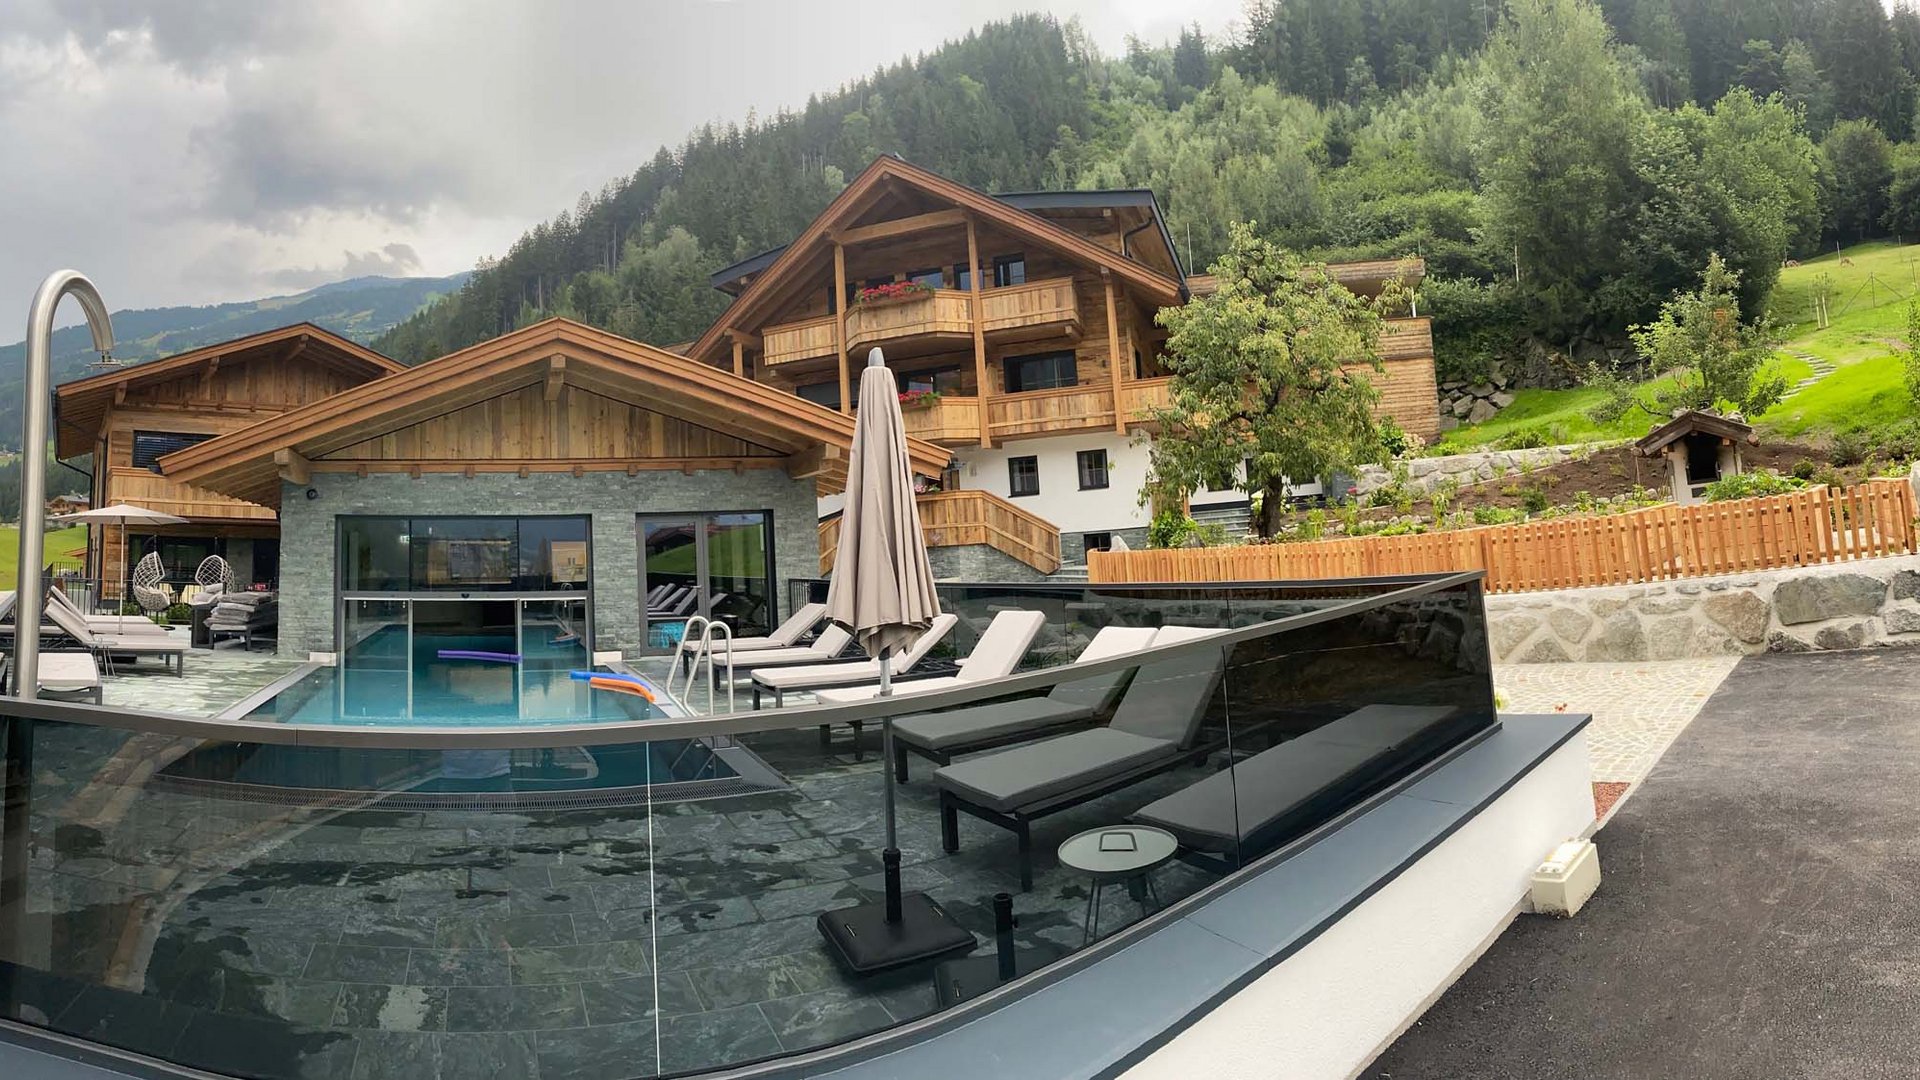 Holidays in Zillertal: full of delights